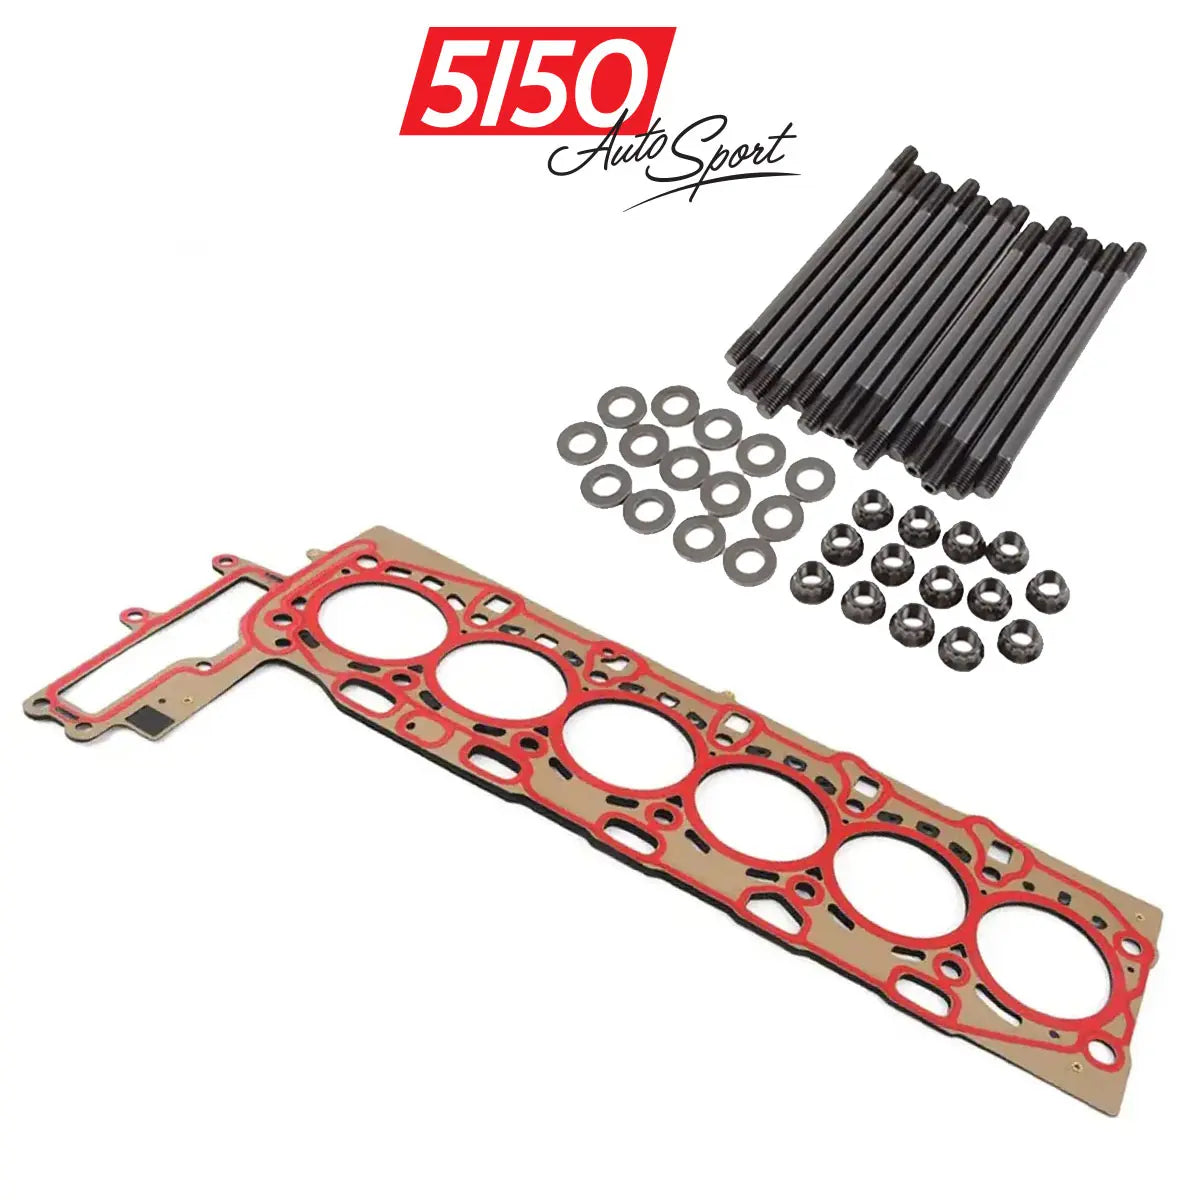 Factory Head Gasket and ARP2000 Head Stud Kit for BMW B58 Gen 1